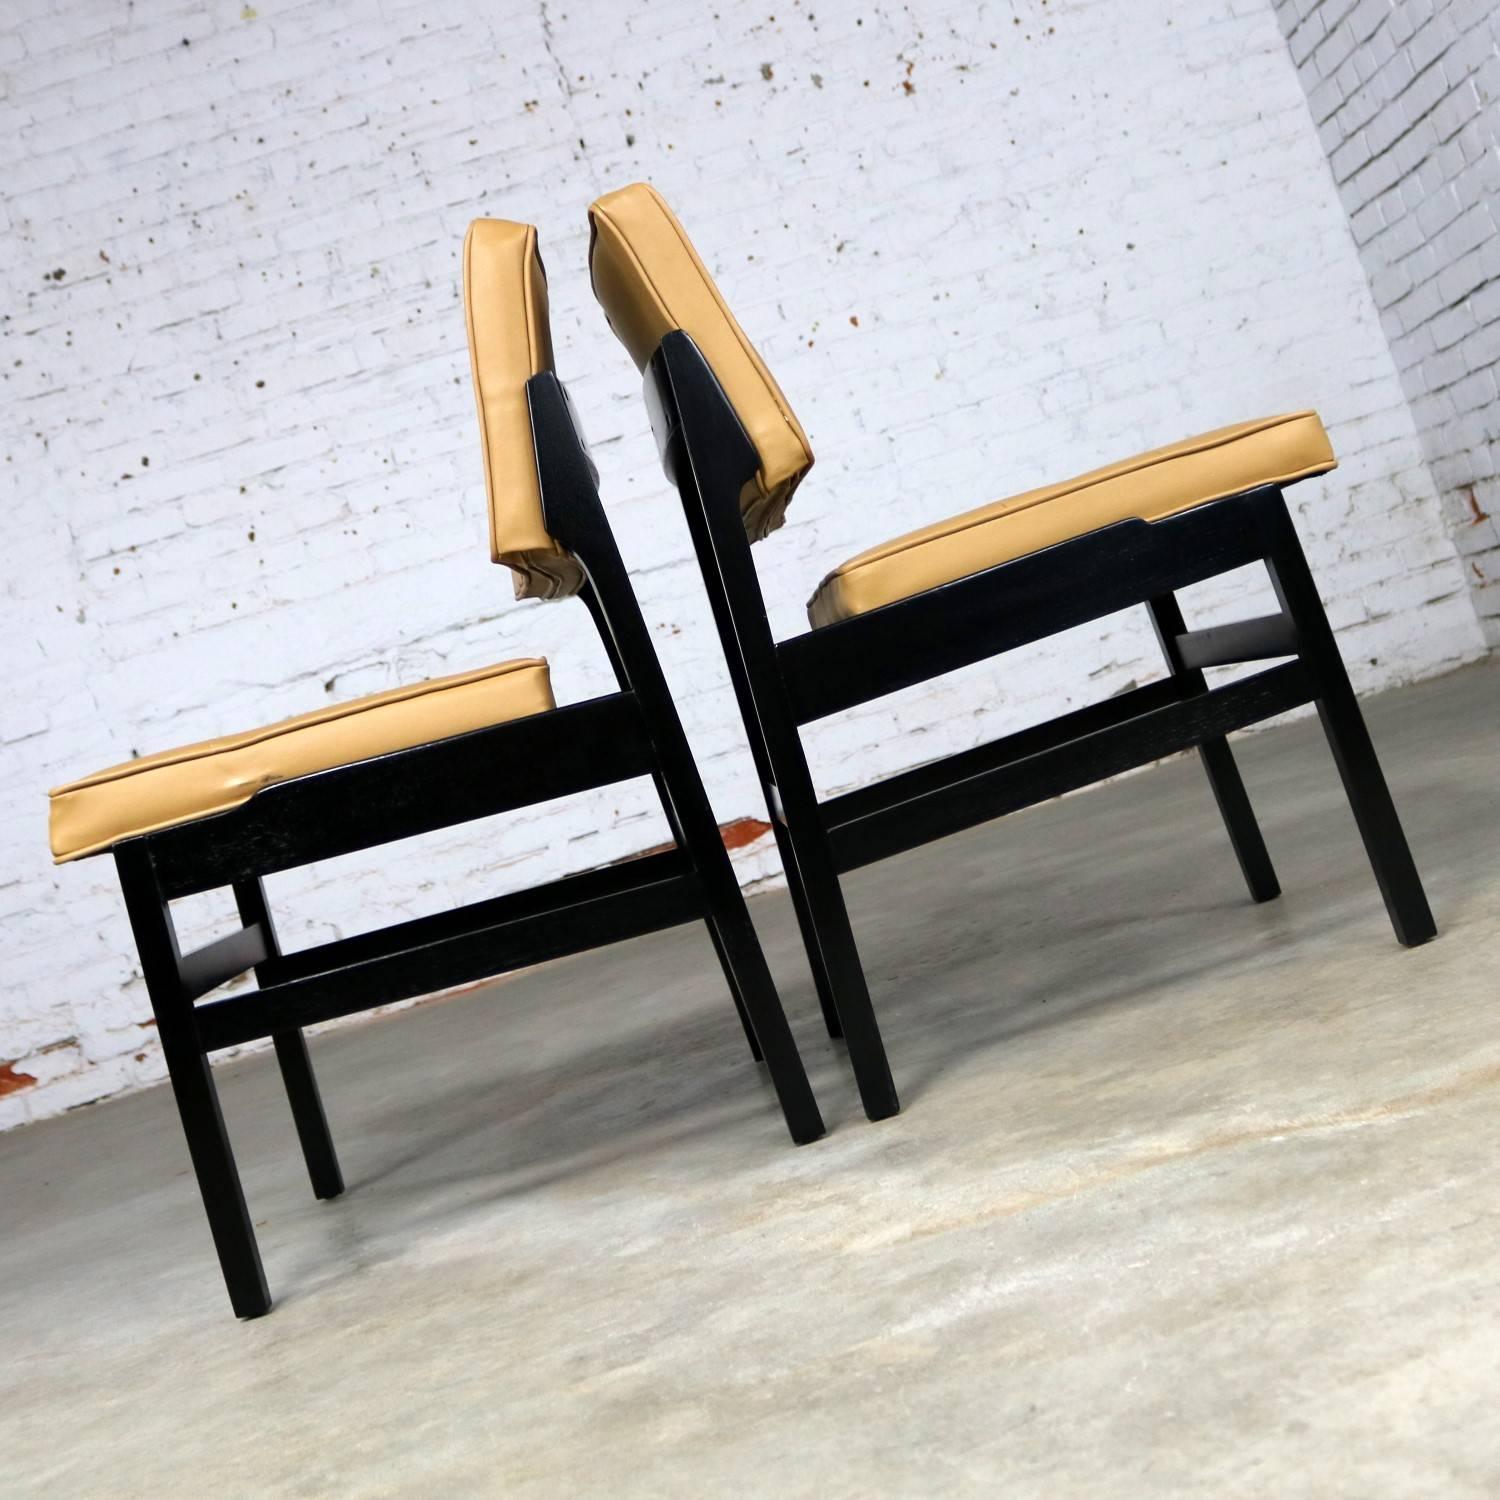 American Pair of Hibriten Blackened Wood and Faux Leather Mid-Century Modern Chairs For Sale